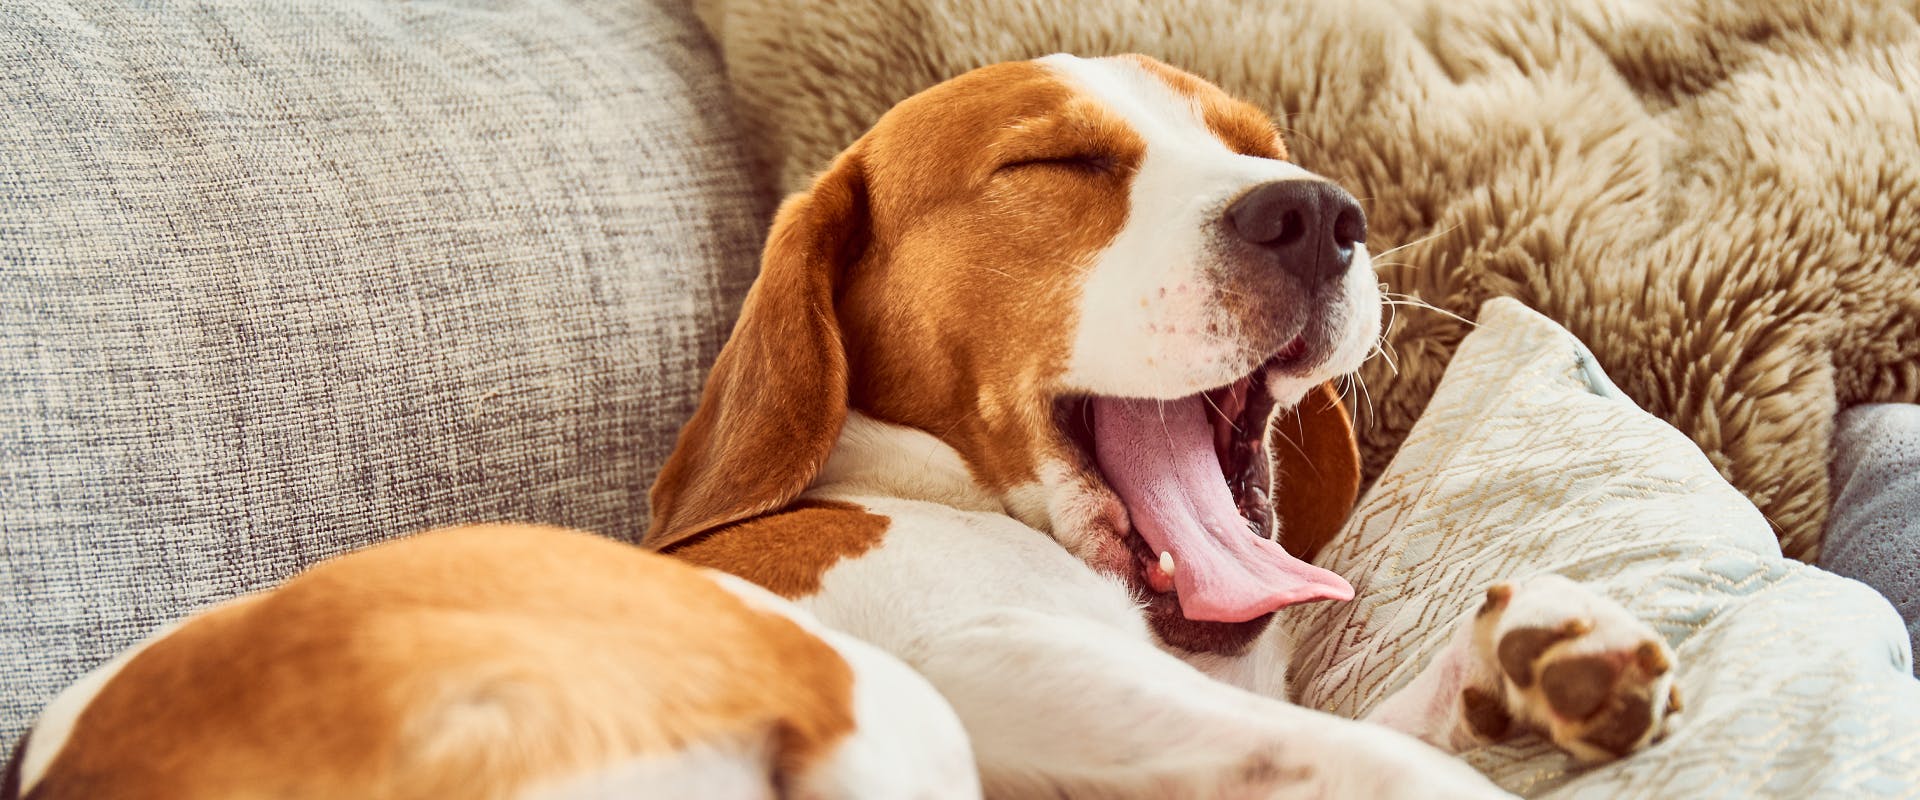 A dog yawns on the couch.